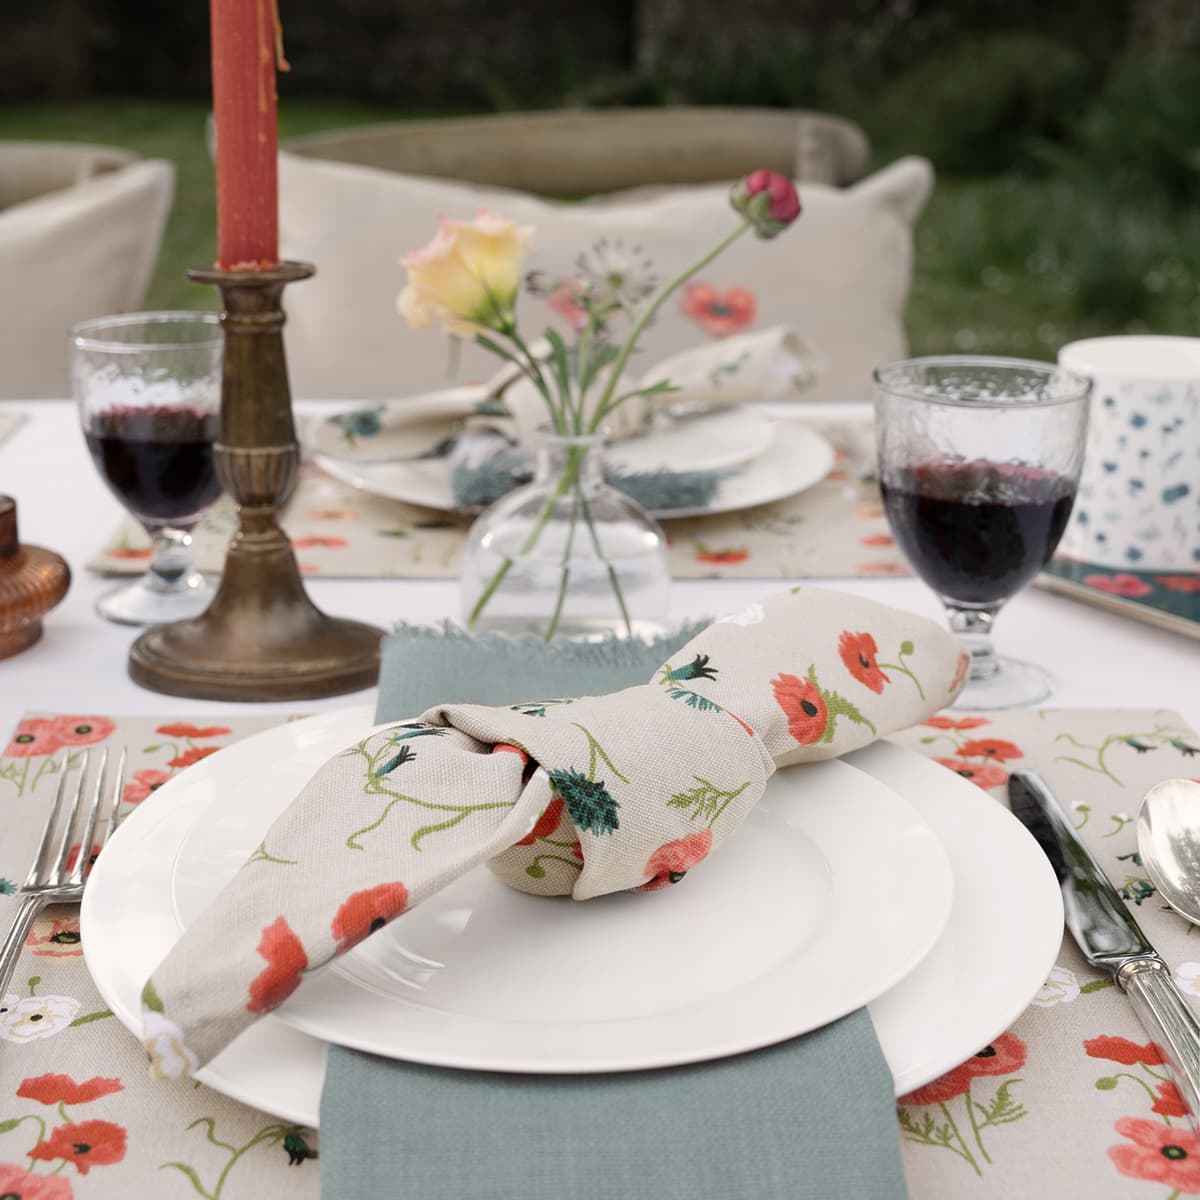 Poppy Meadow Fabric Placemats 